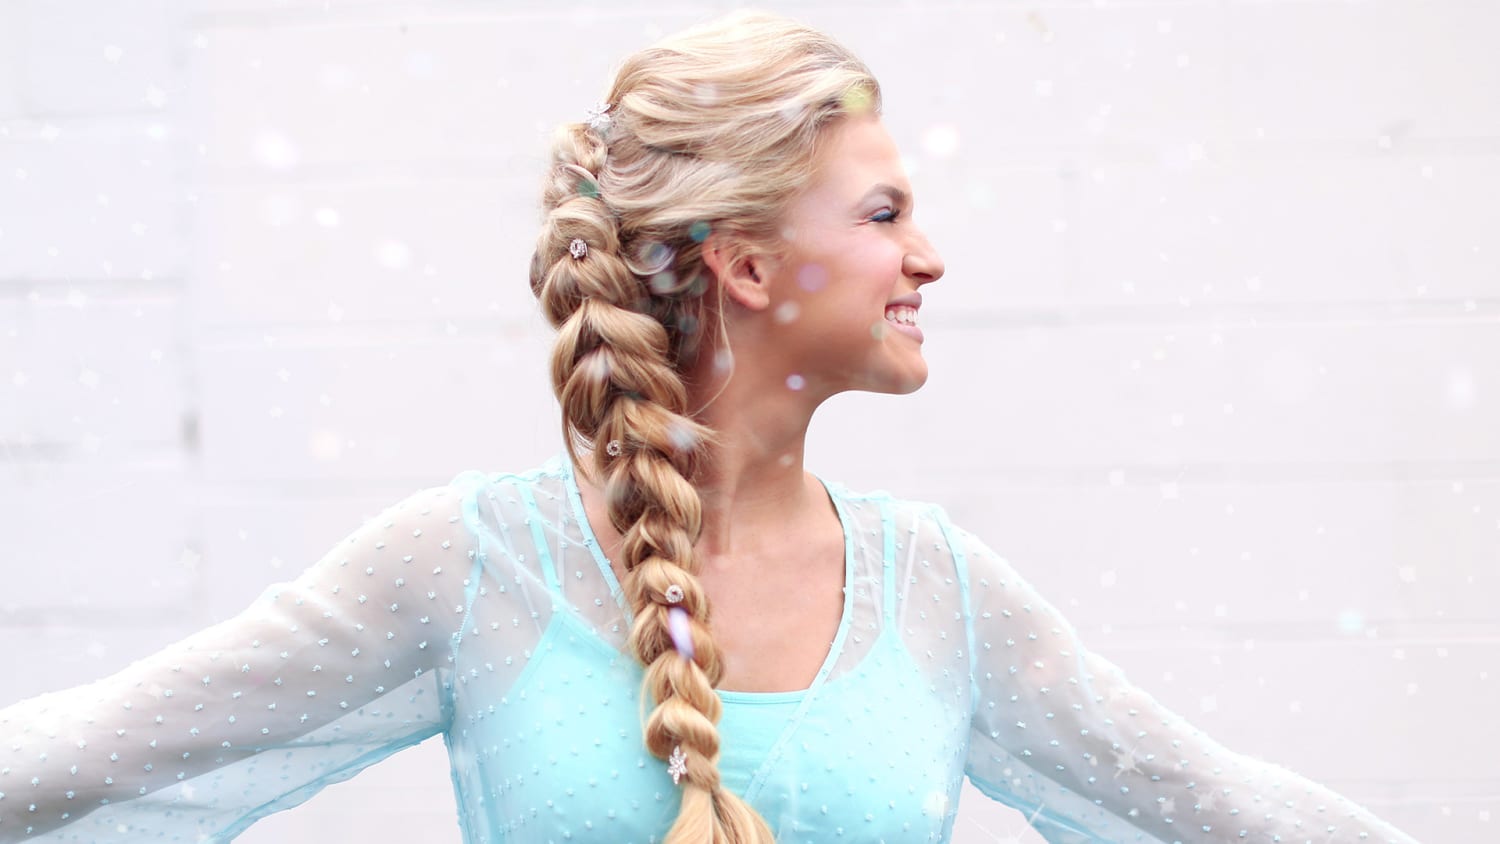 Book Tutorial on Disney Frozen and Princess Hairstyles